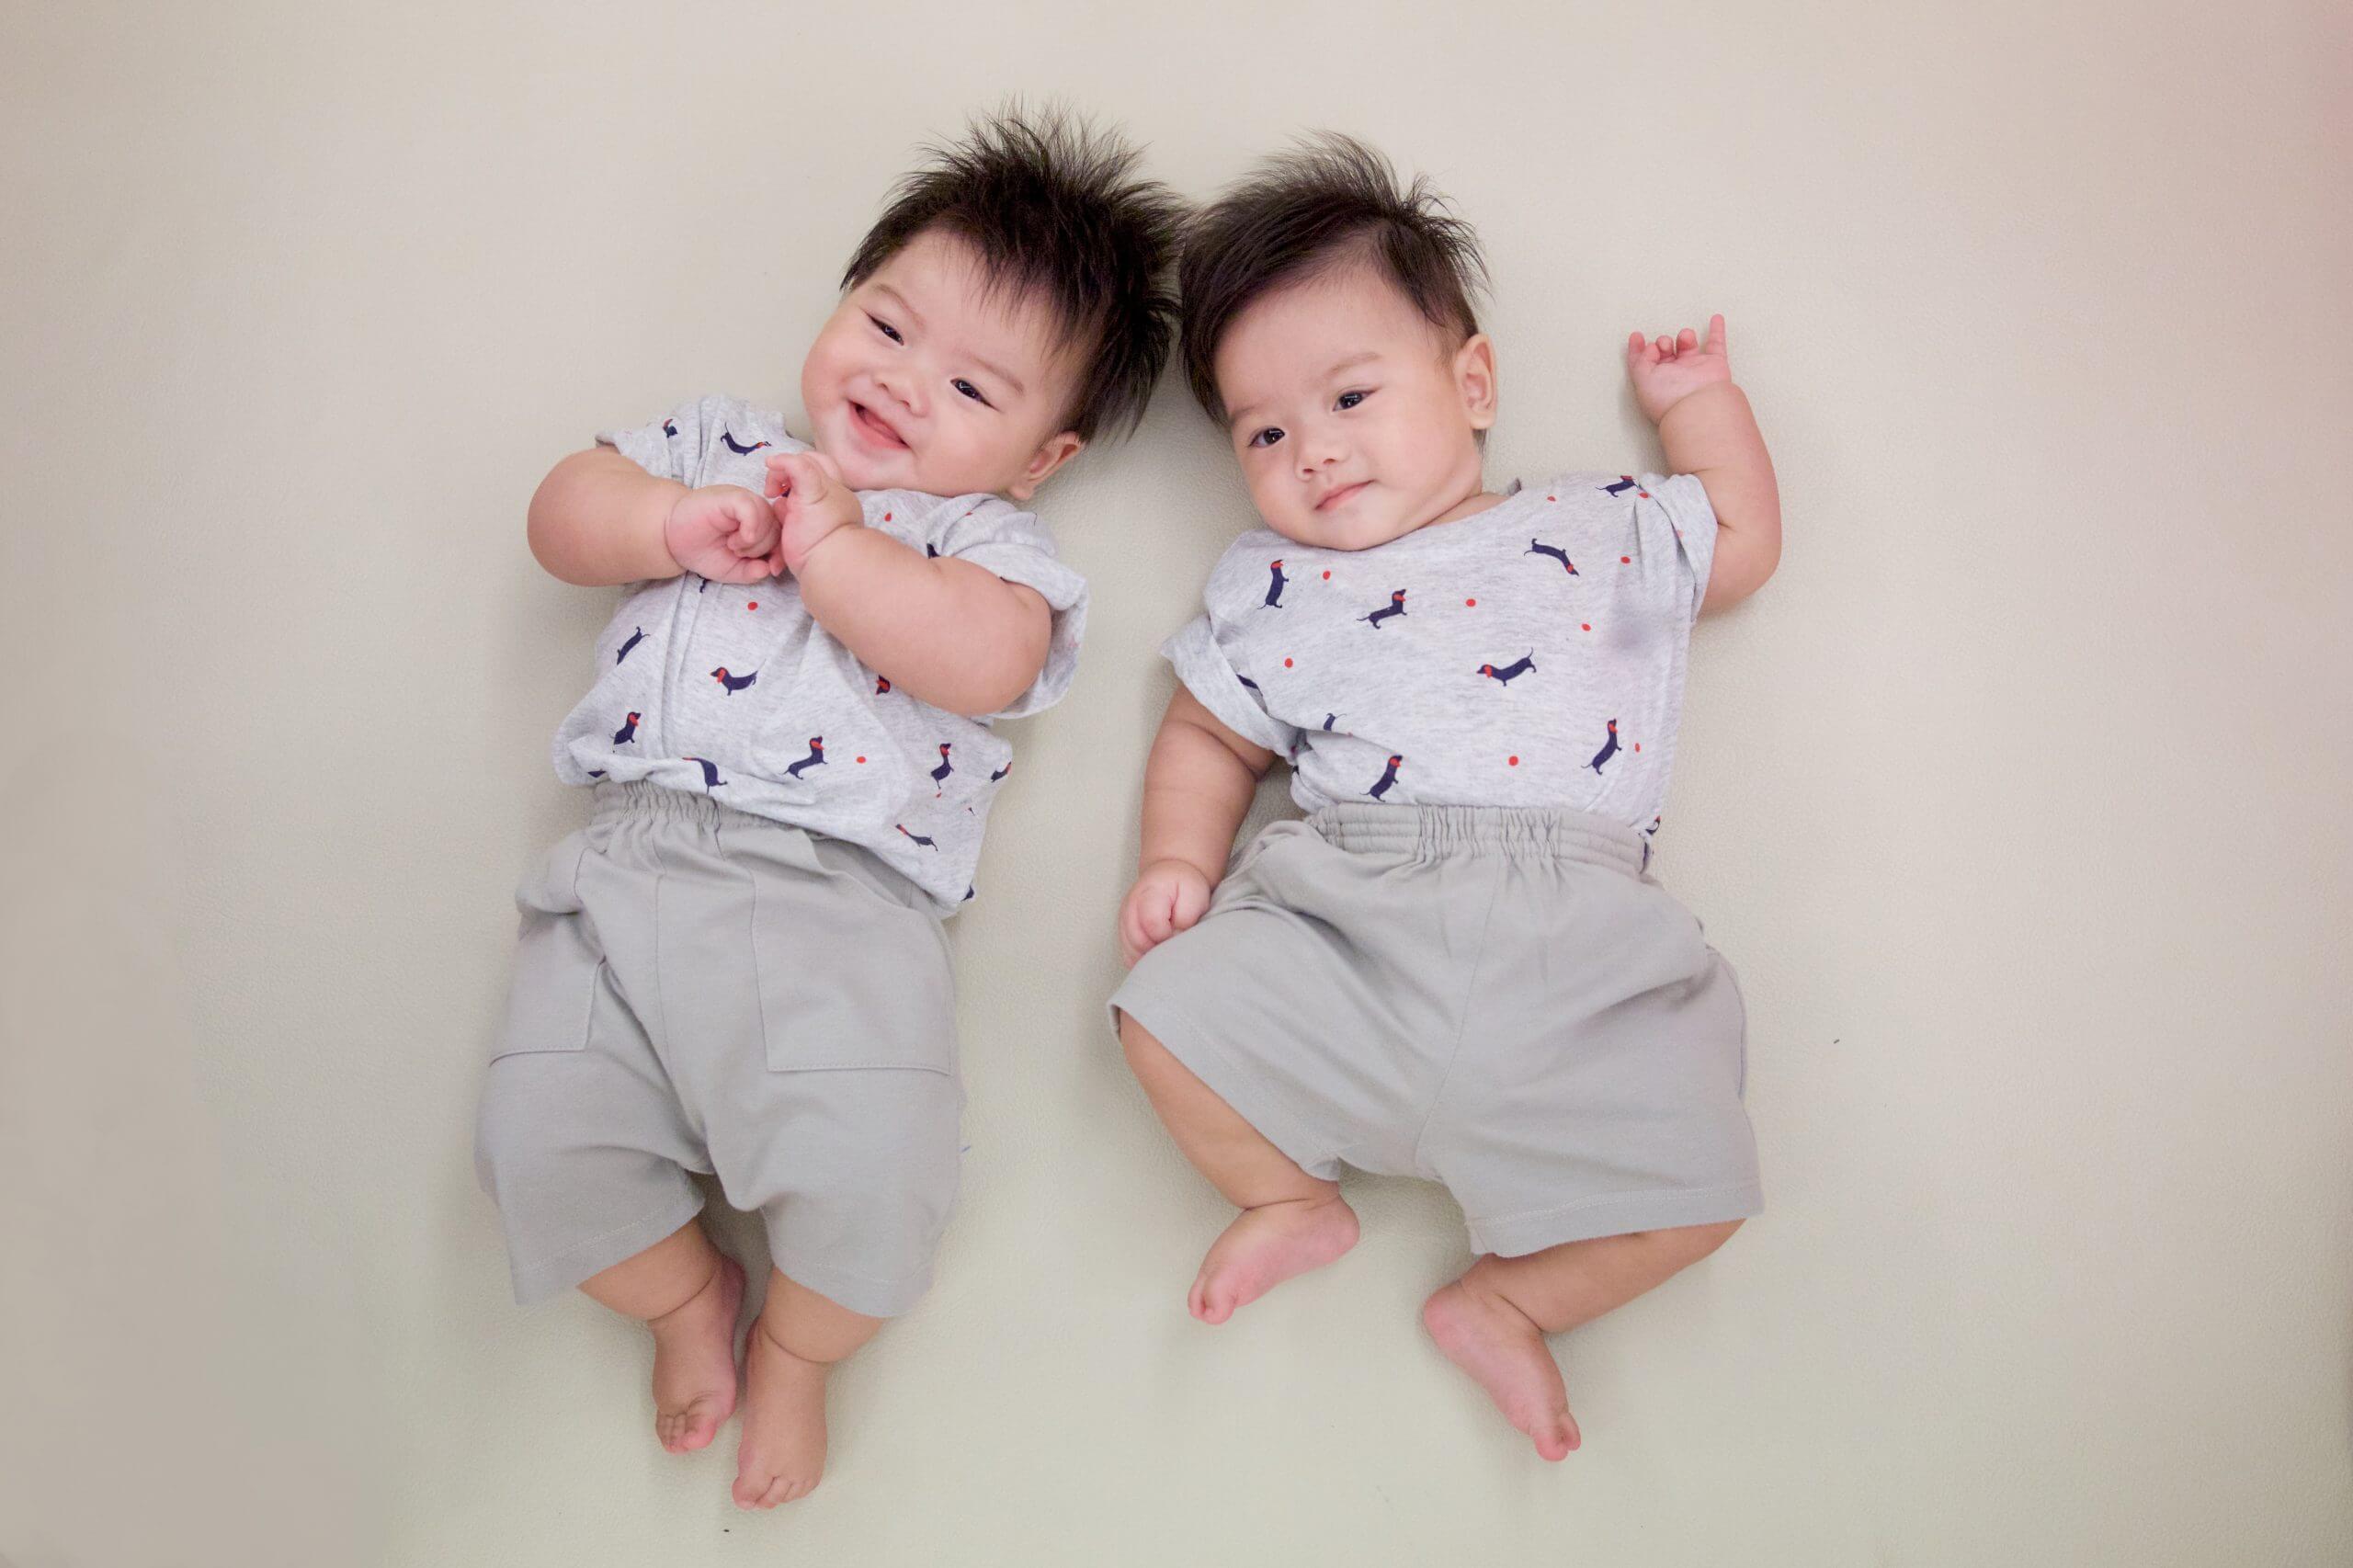 How Many Newborn Outfits Do You Need For Twins?